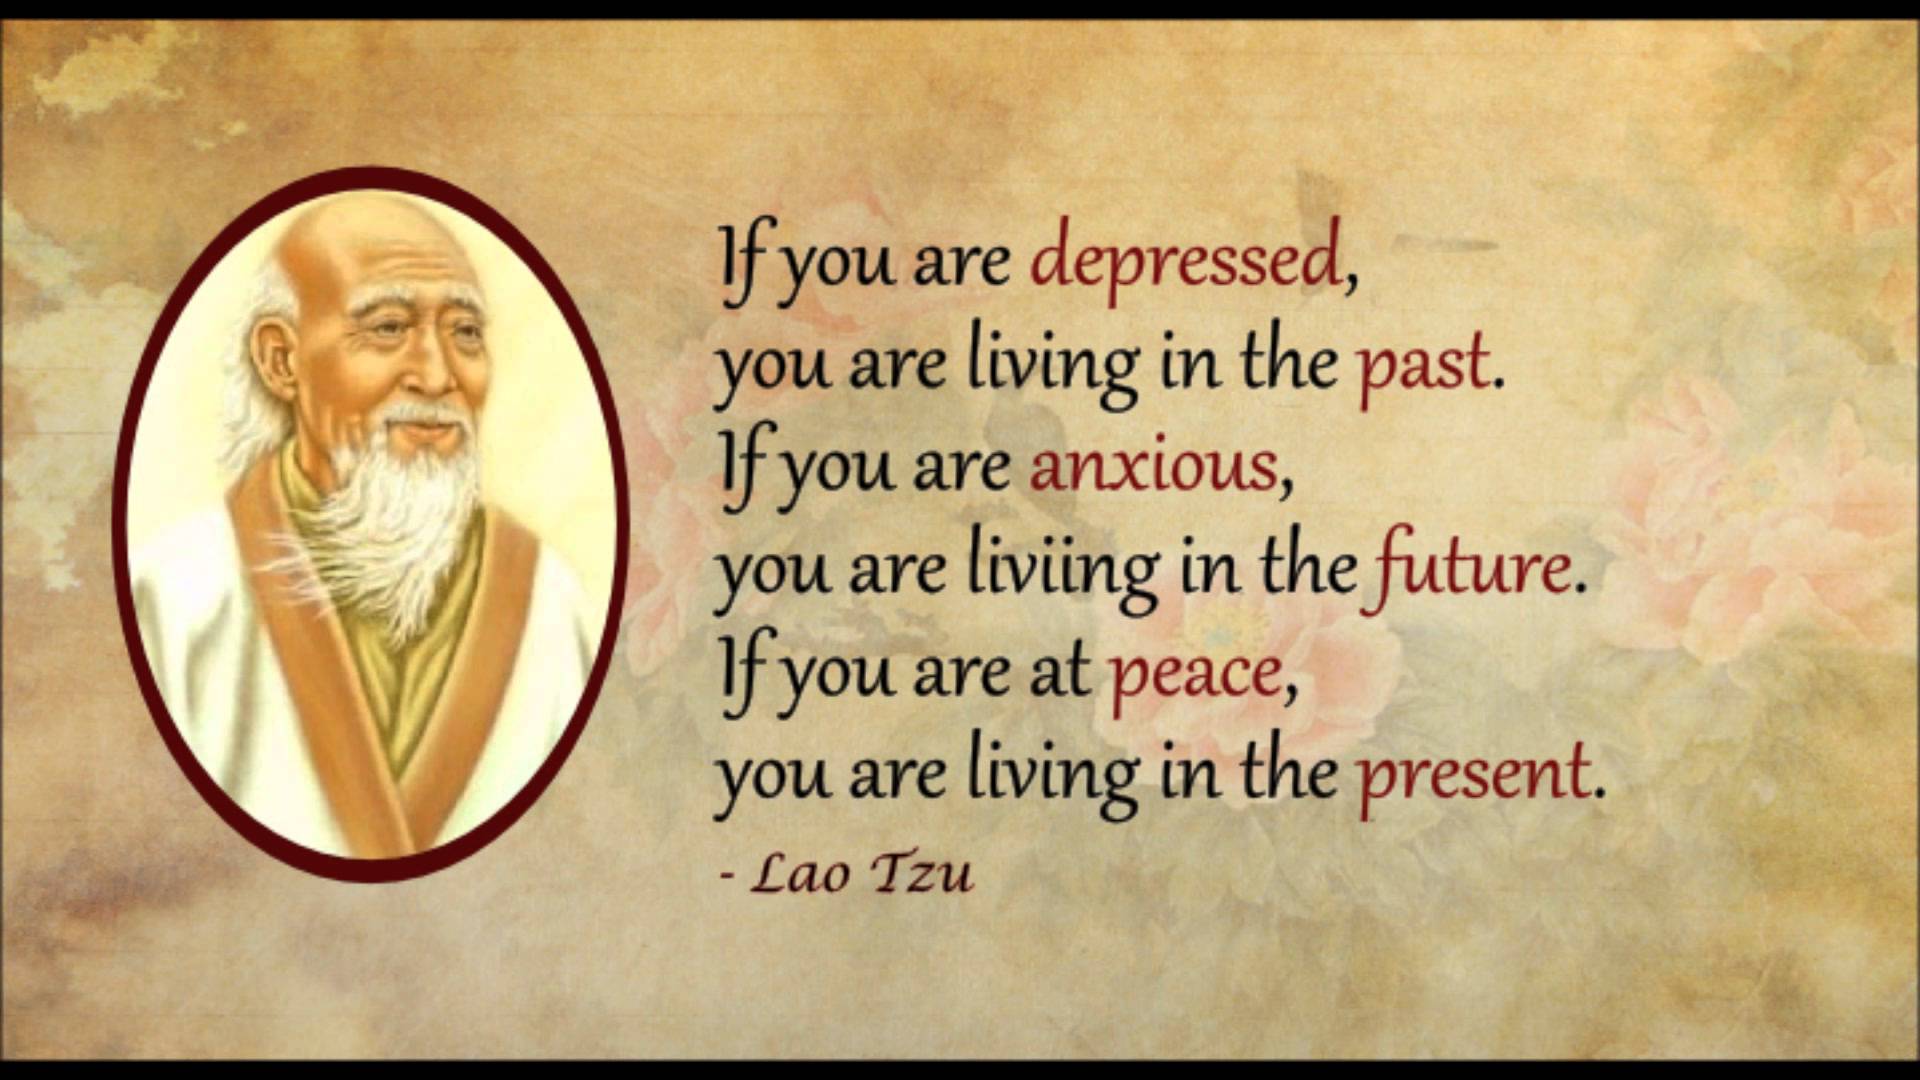 Inspirational and Motivational Lao Tzu and Confucius Quotes and Images